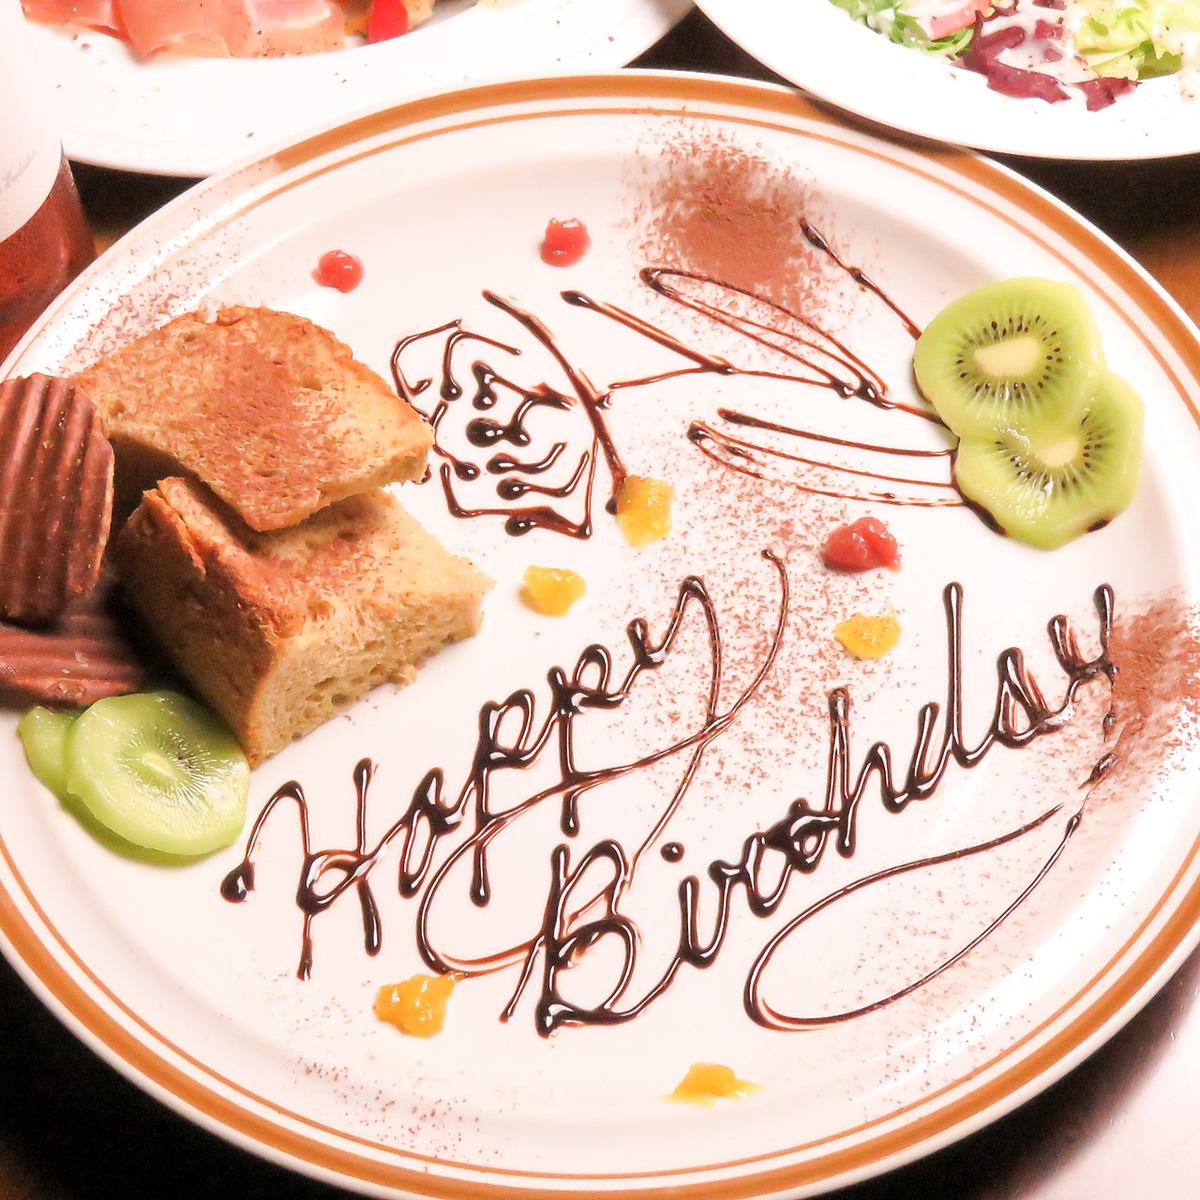 There is a perfect course for birthdays and anniversaries ☆